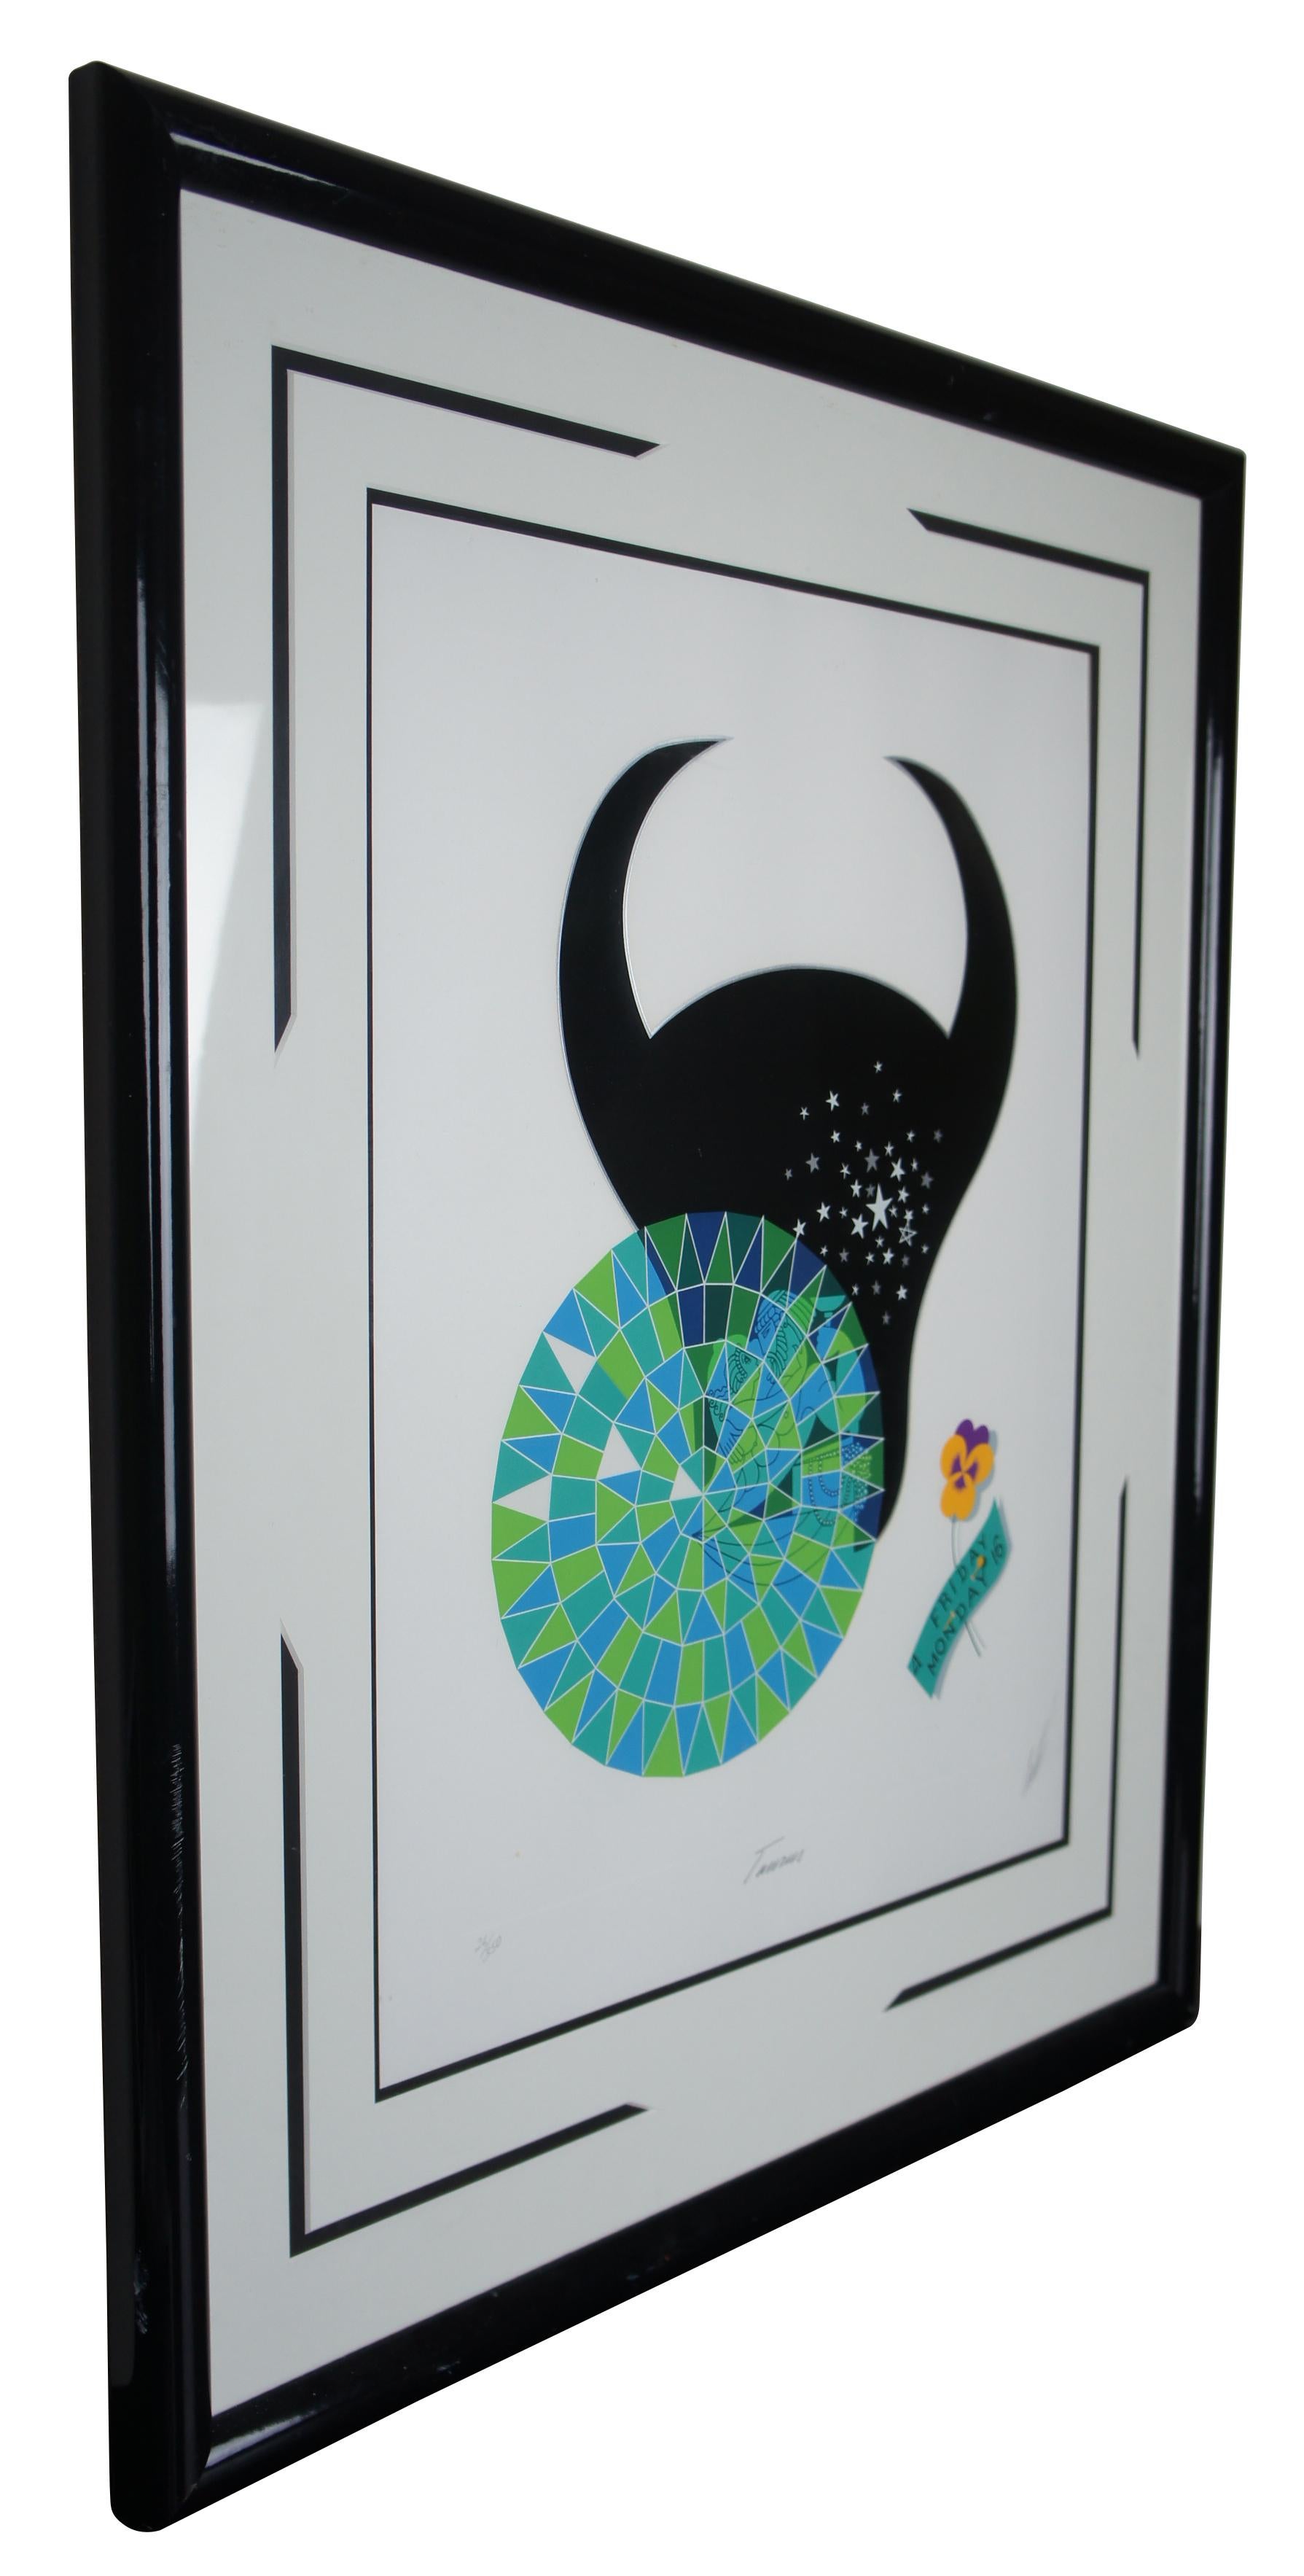 Pencil signed and numbered 26/350 Erte print titled Taurus, portraying a bull’s head silhouette strewn with stars, two Greek figures embracing behind a blue and green stained glass medallion and a pansy with the label “4 Friday, Monday 16.” Measure: